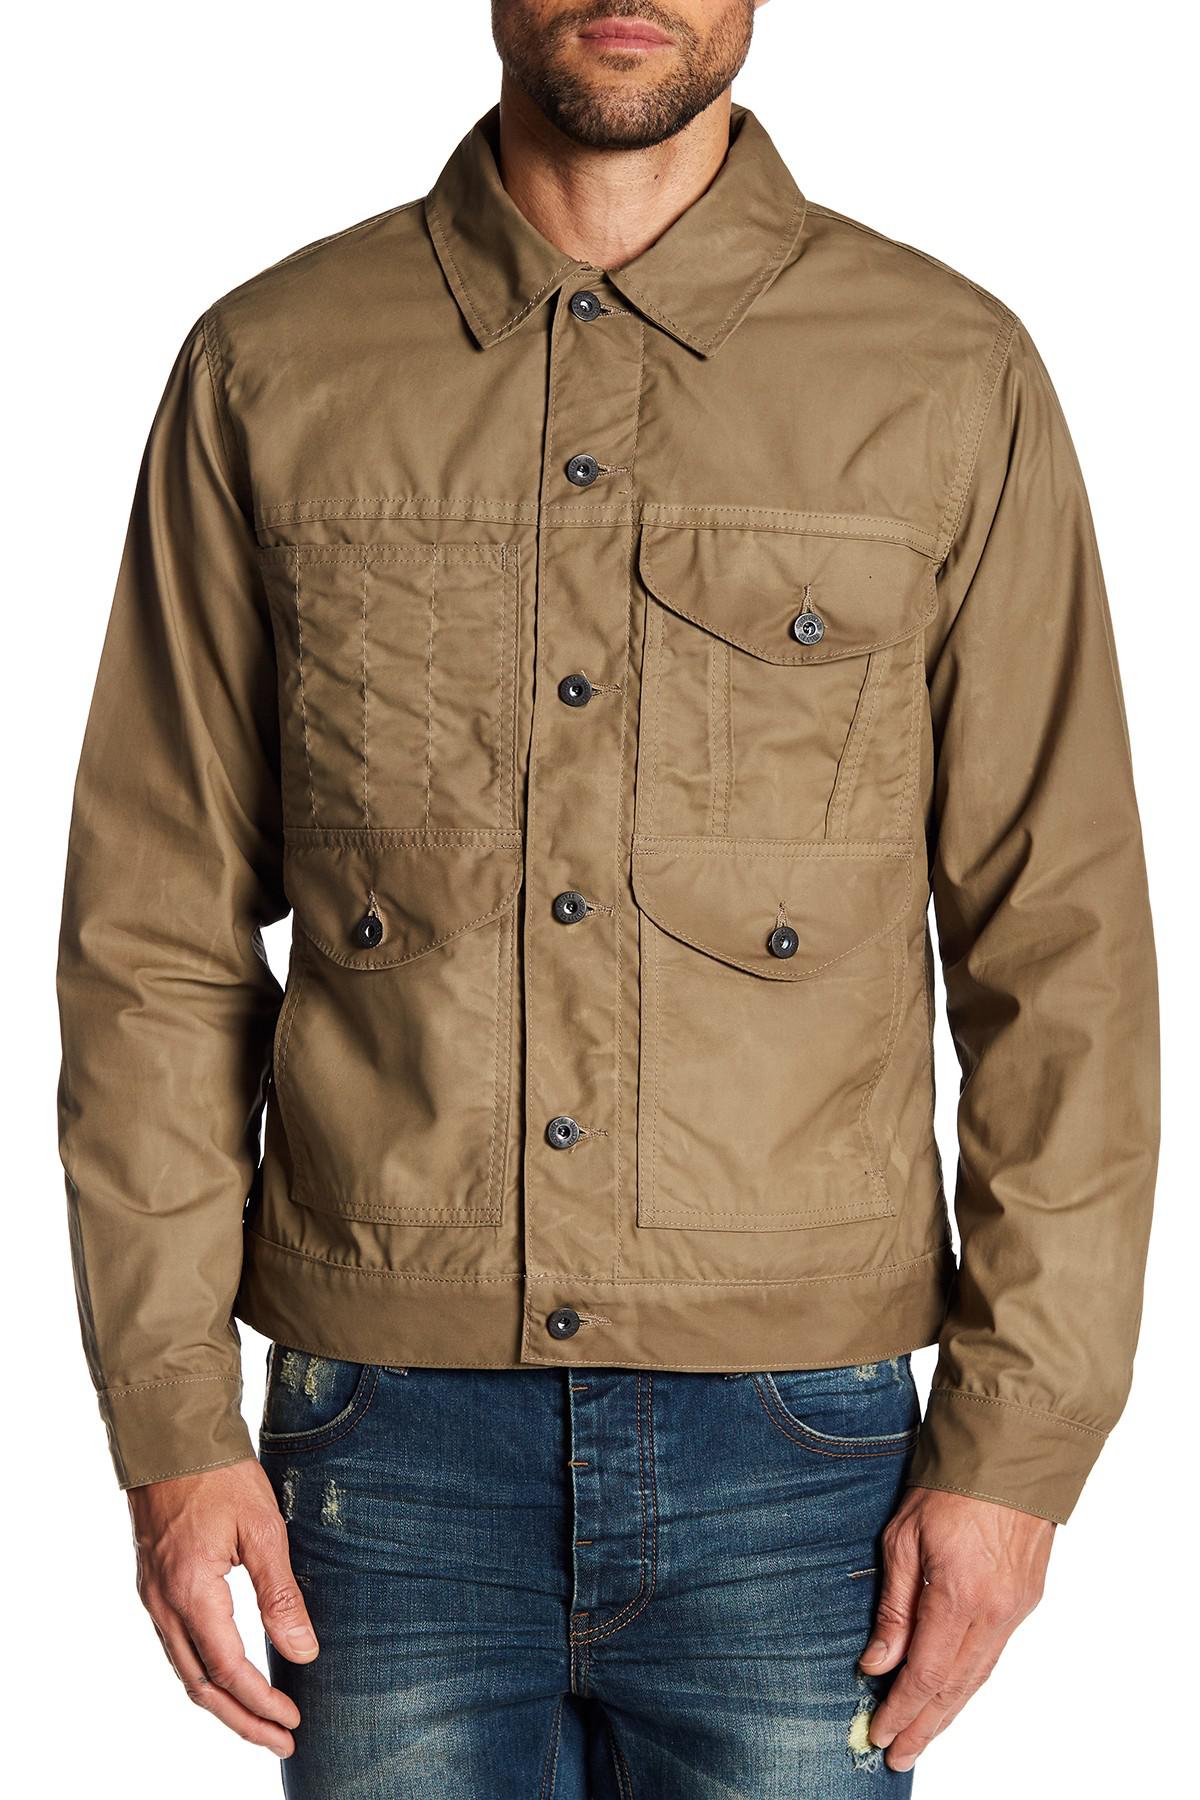 Filson Cotton Lined Cruiser Jacket in Tan (Brown) for Men - Lyst